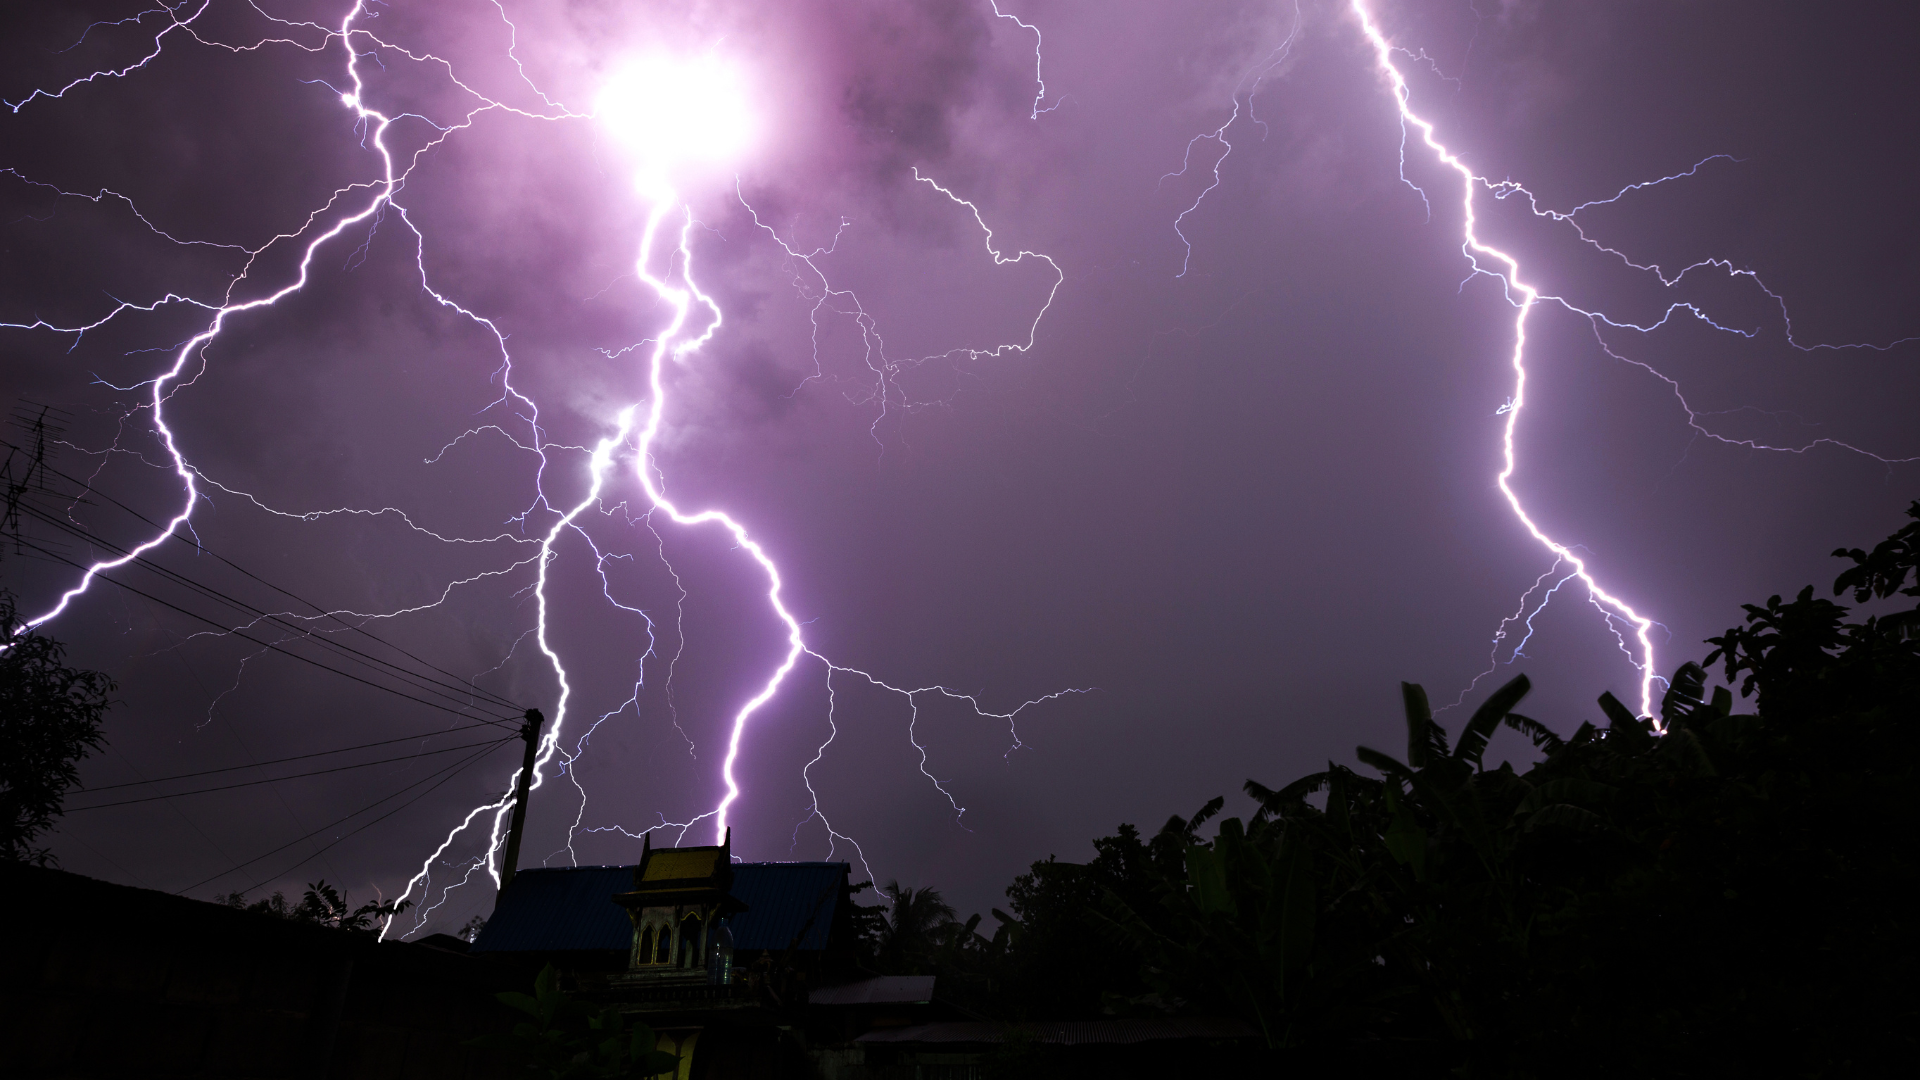 Thunderstorms Expected in Tamil Nadu, Predicts Chennai MeT